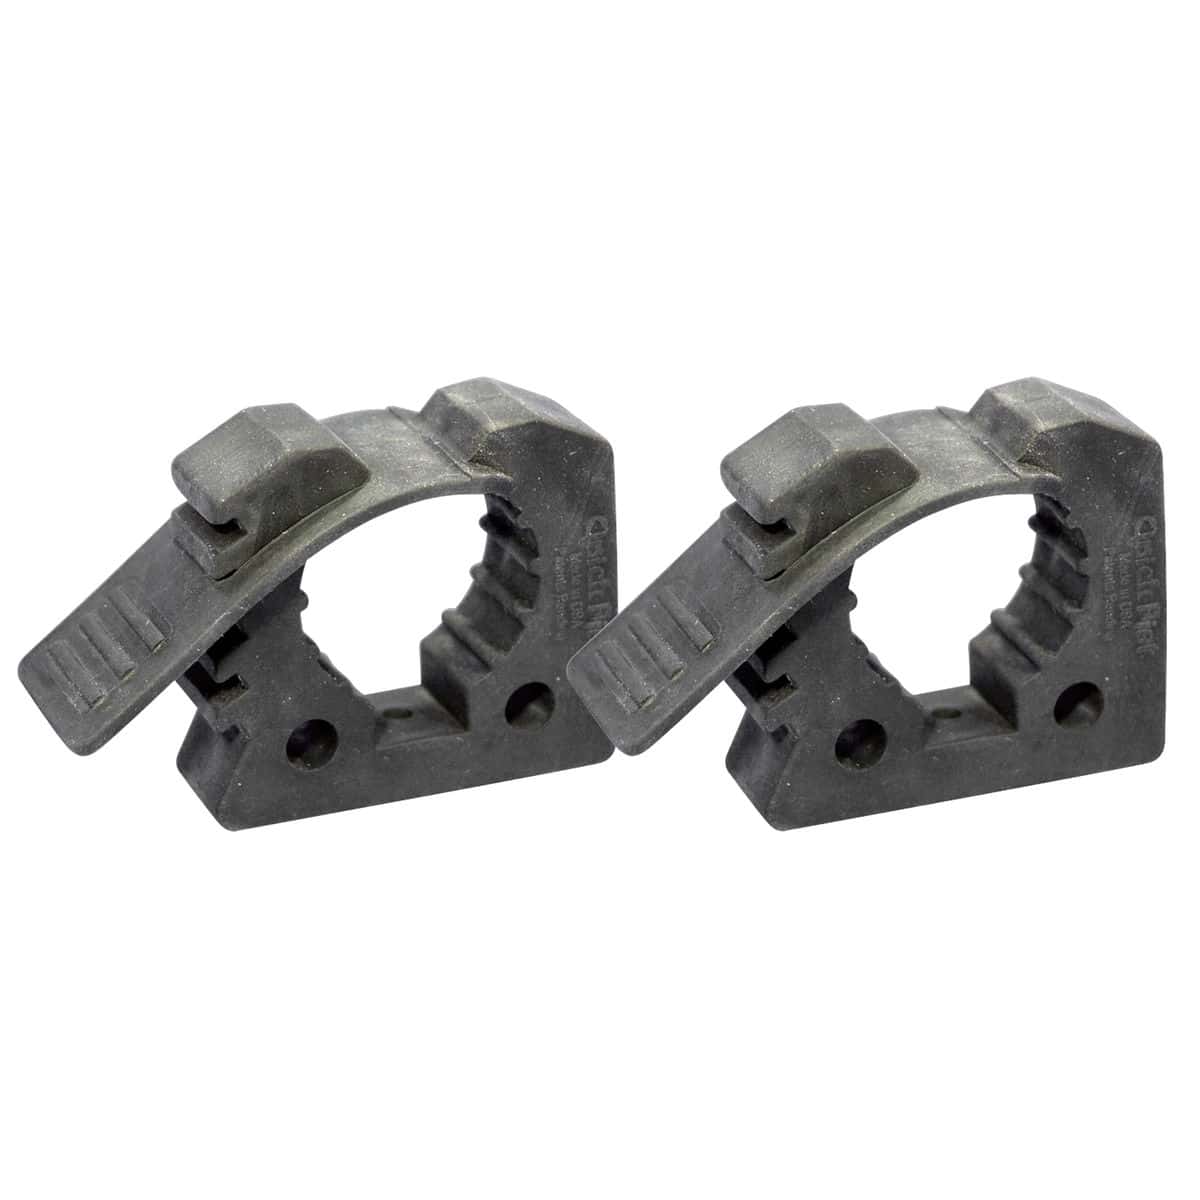 Pole Clamps - Gator Trax Boats